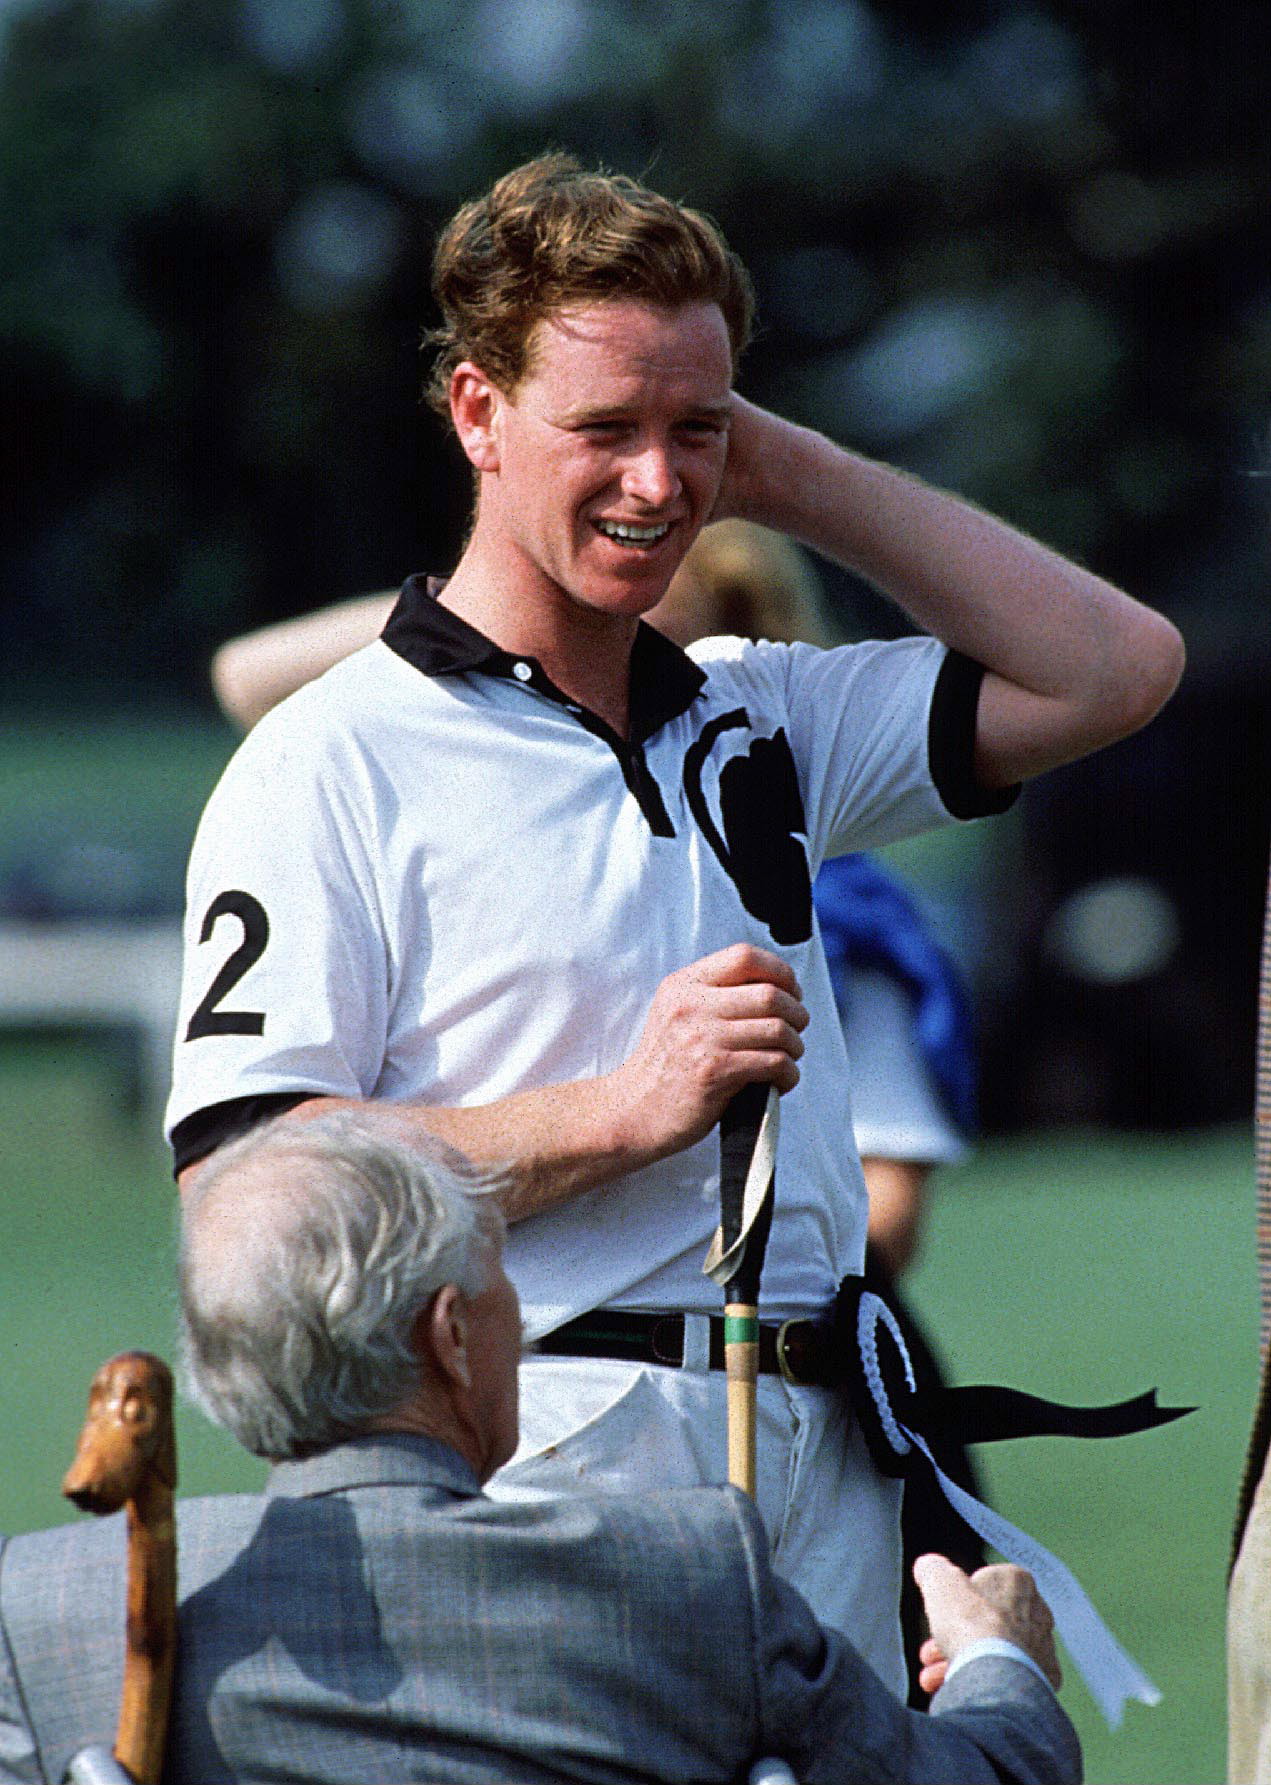 James Hewitt at The Royal Berkshire Polo Club near Windsor on July 16, 1991. | Source: Getty Images